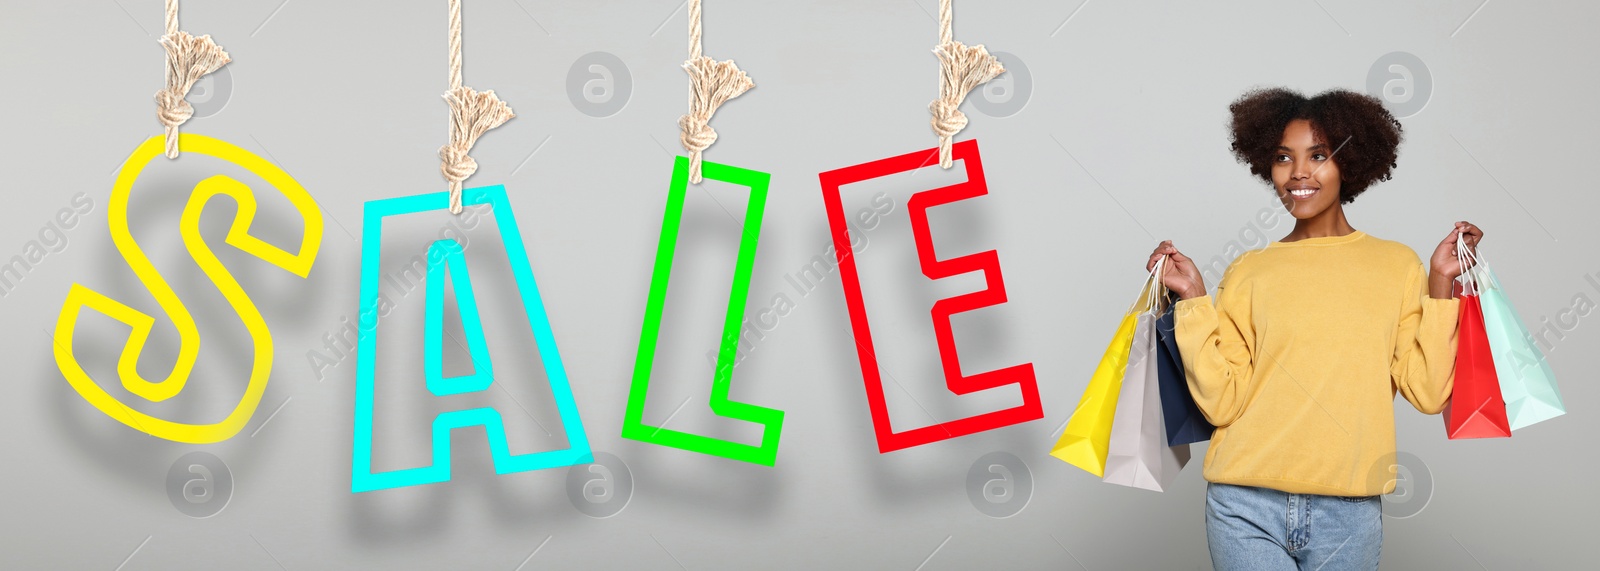 Image of Happy woman with shopping bags on light grey background, banner design. Word Sale of hanging letters